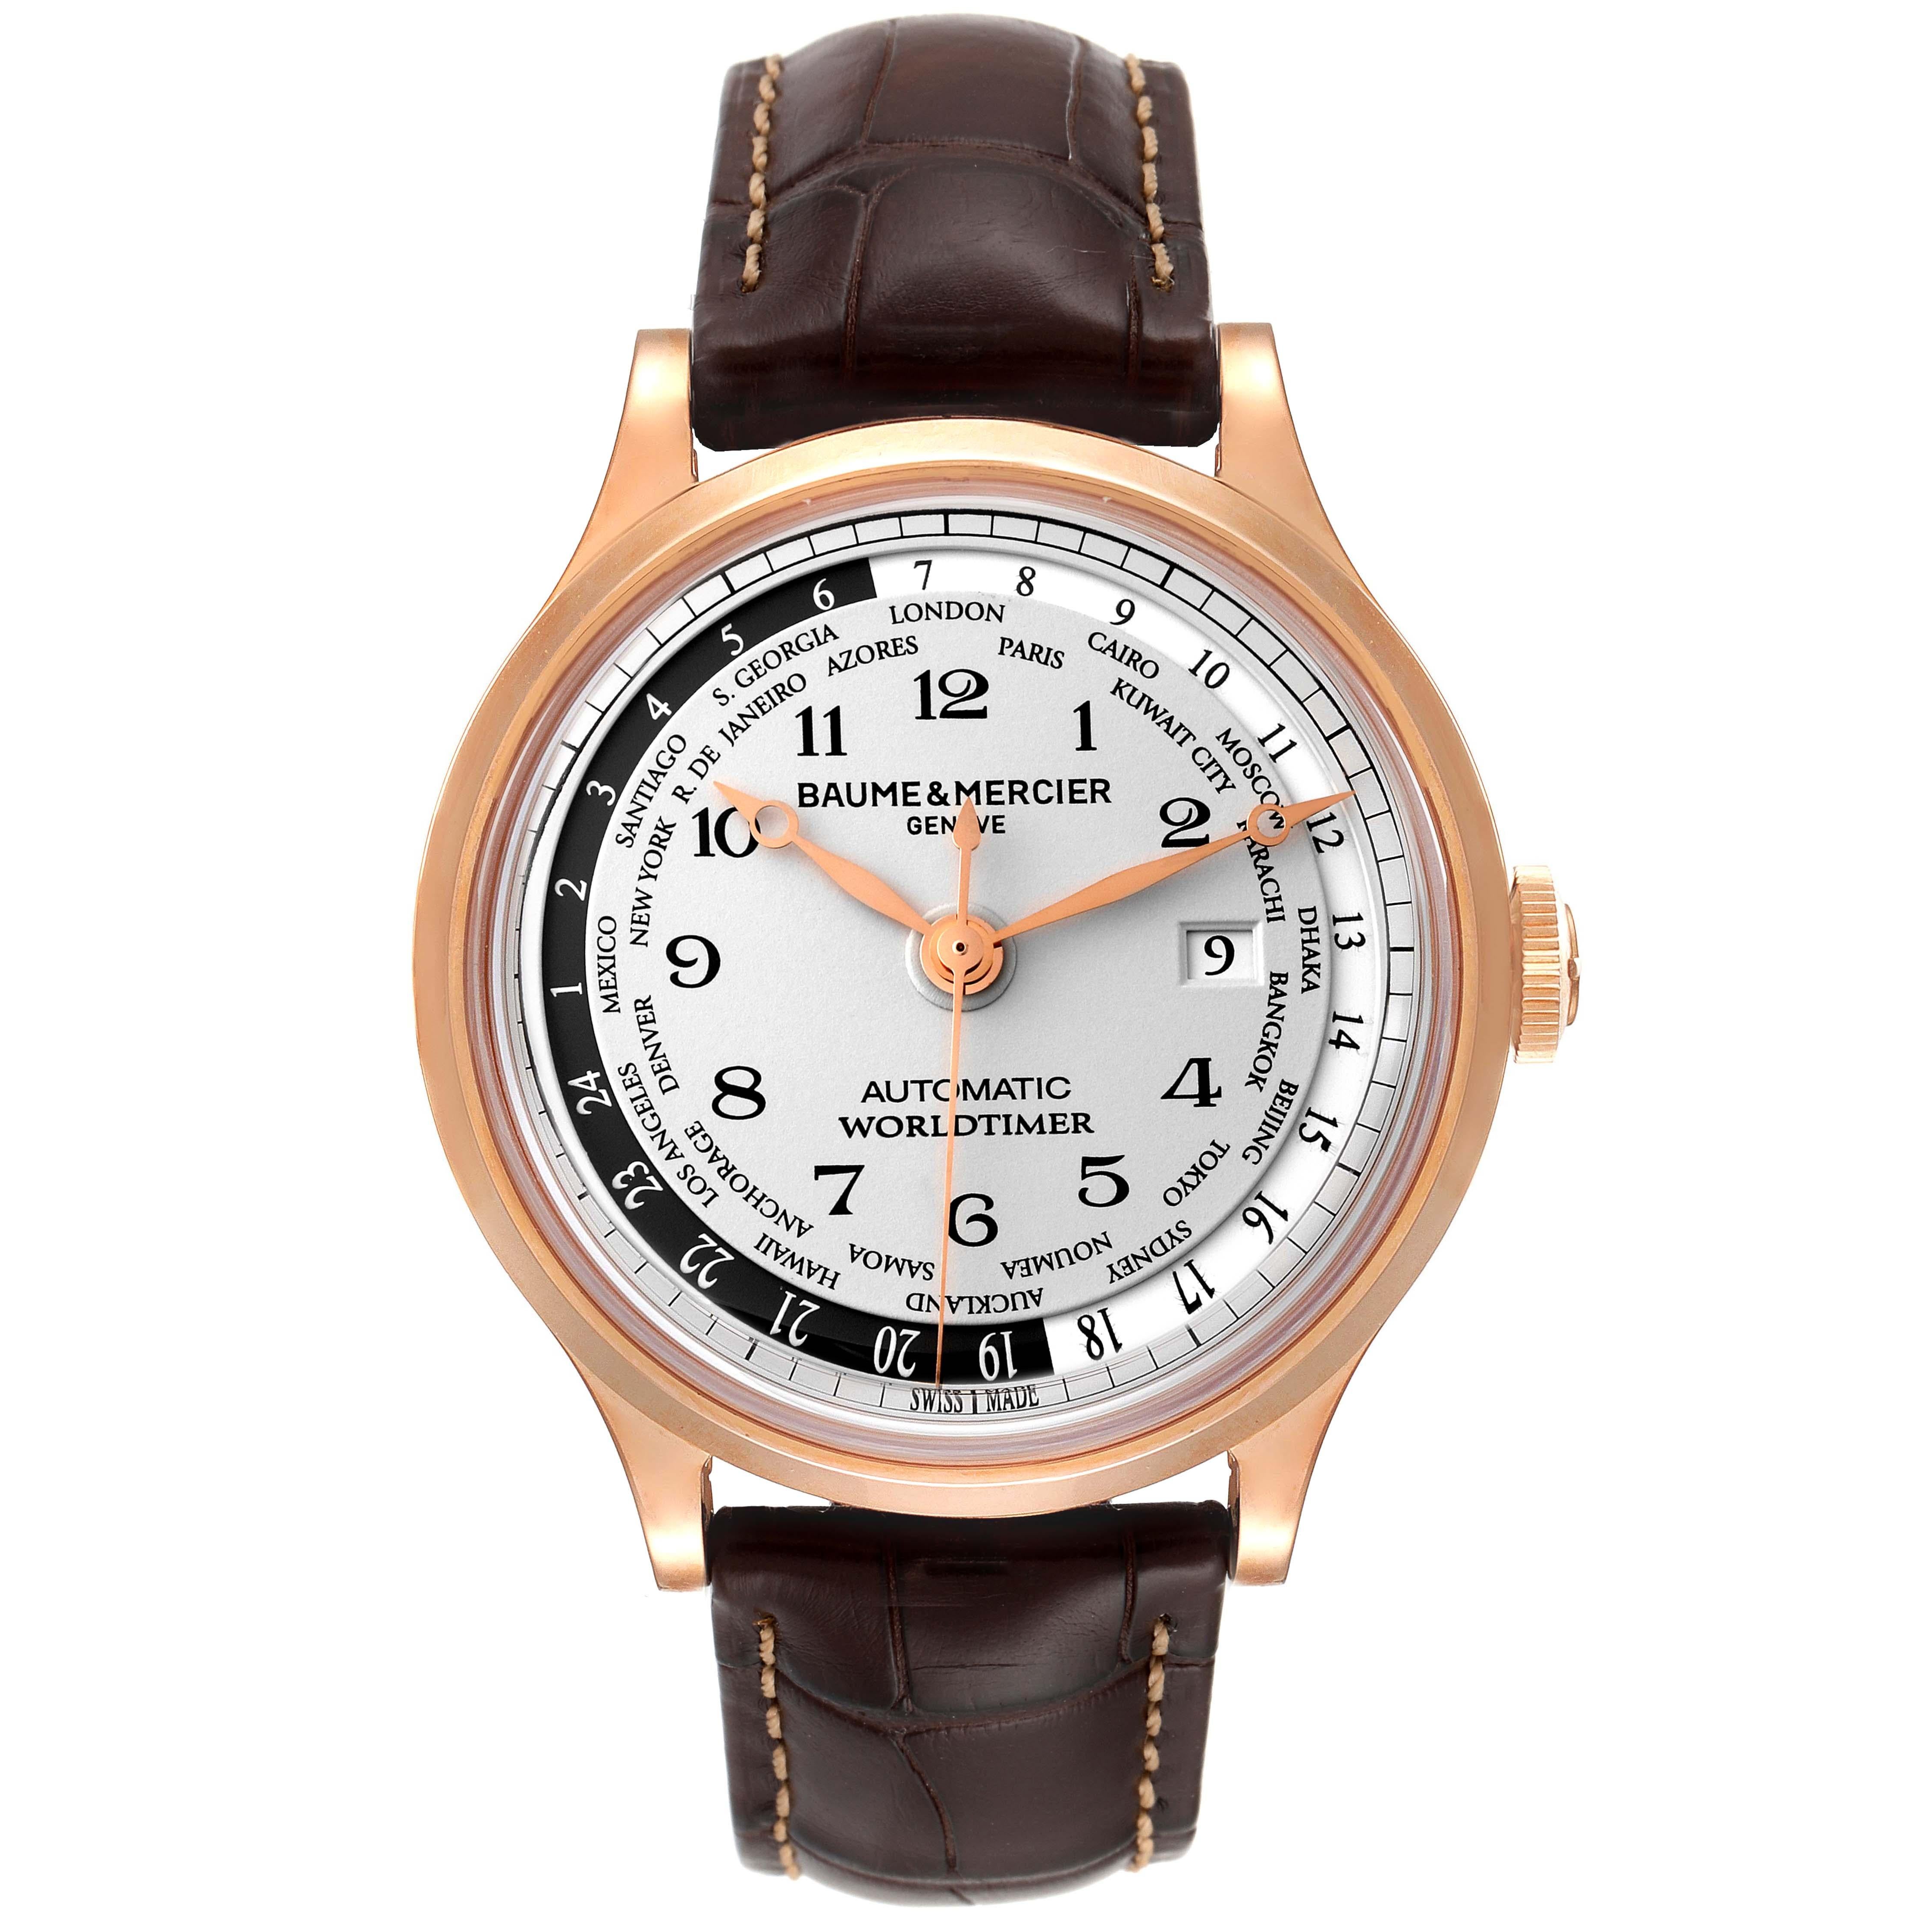 Baume Mercier Capeland Worldtimer Rose Gold  Mens Watch 10107. Automatic self-winding winding movement. 18k rose gold case 44.0 mm in diameter. Case thickness 14.2 mm. Exhibition sapphire case back. . Scratch resistent sapphire crystal. Silver dial